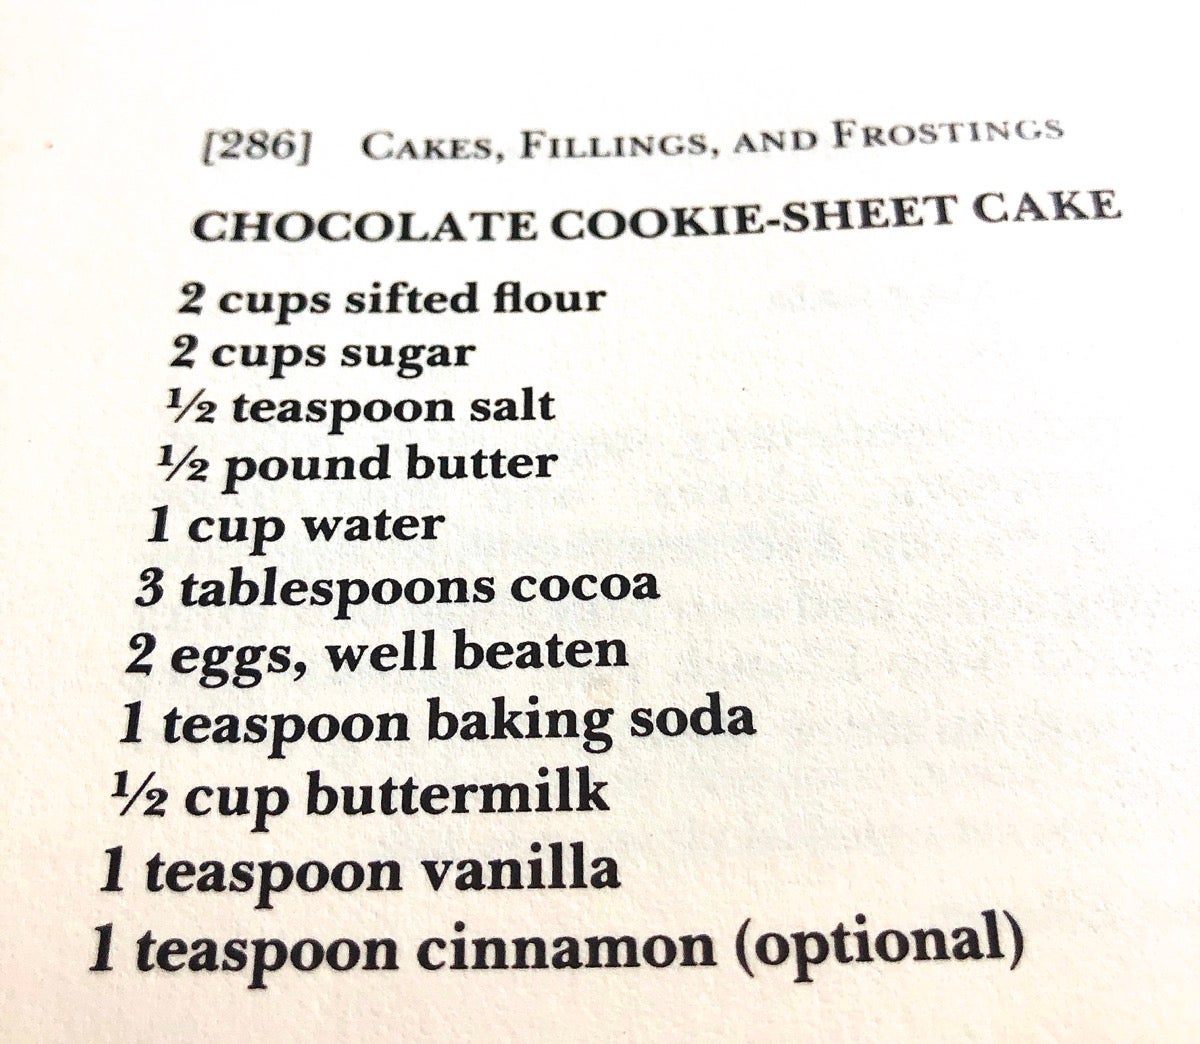 Chocolate cake recipe from an older cookbook  